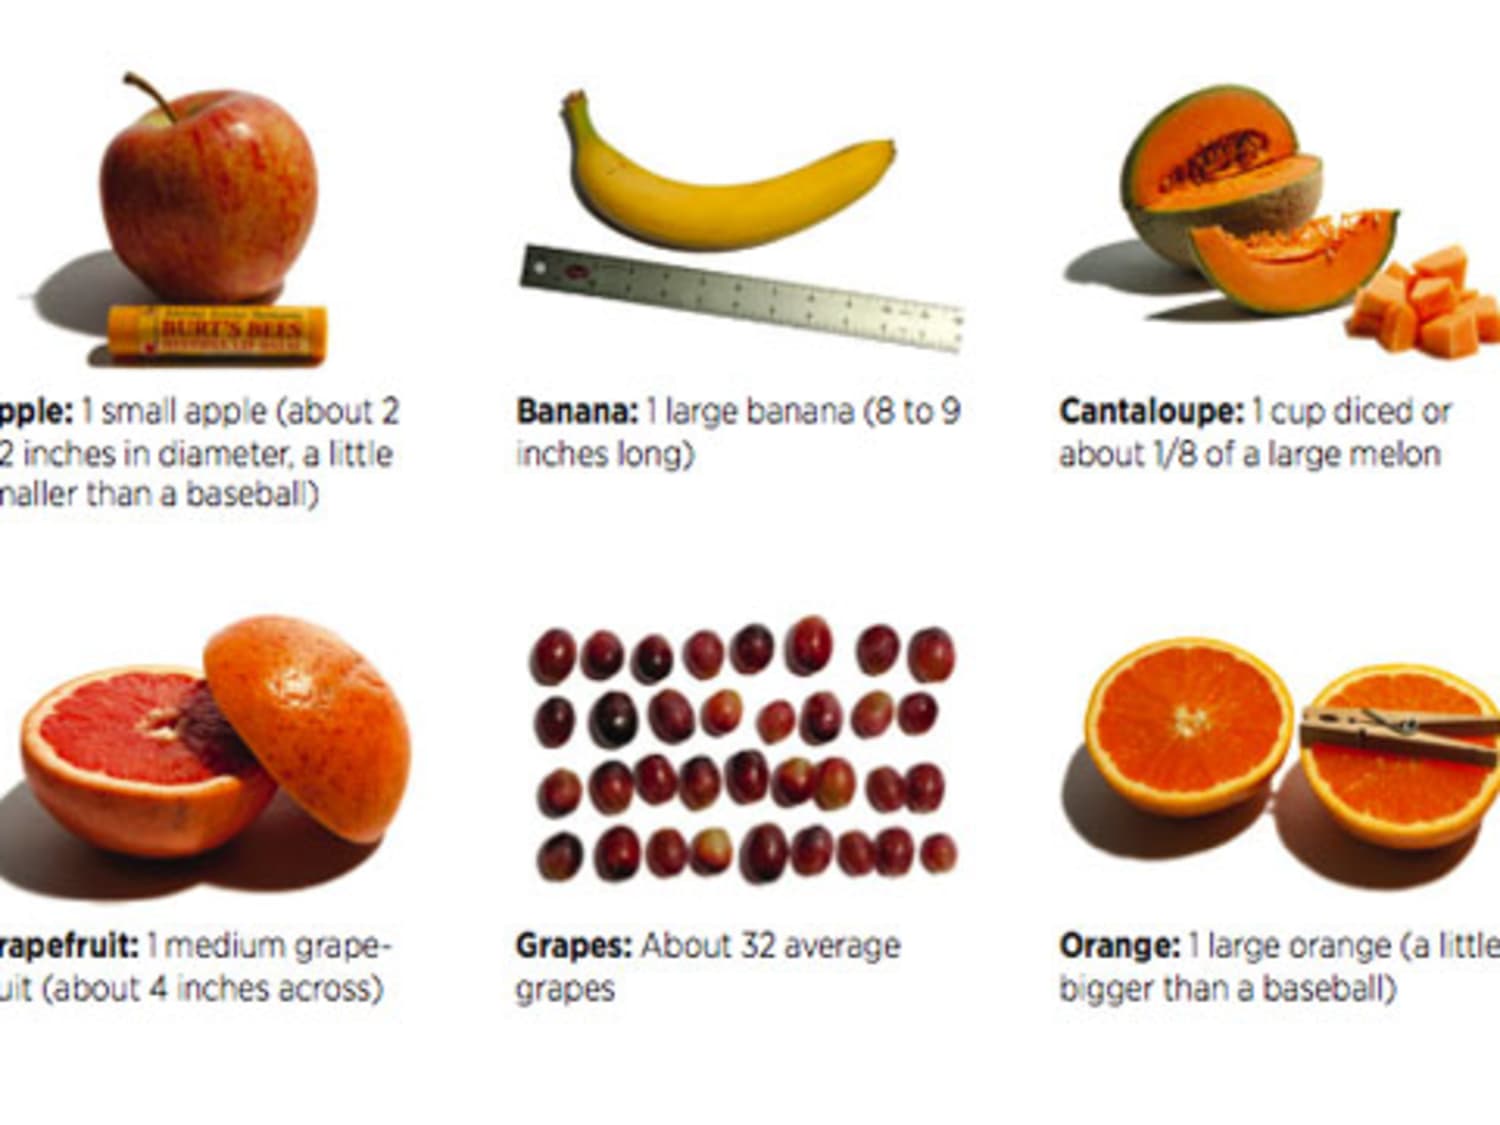 If you could have one fruit from each category what would they be